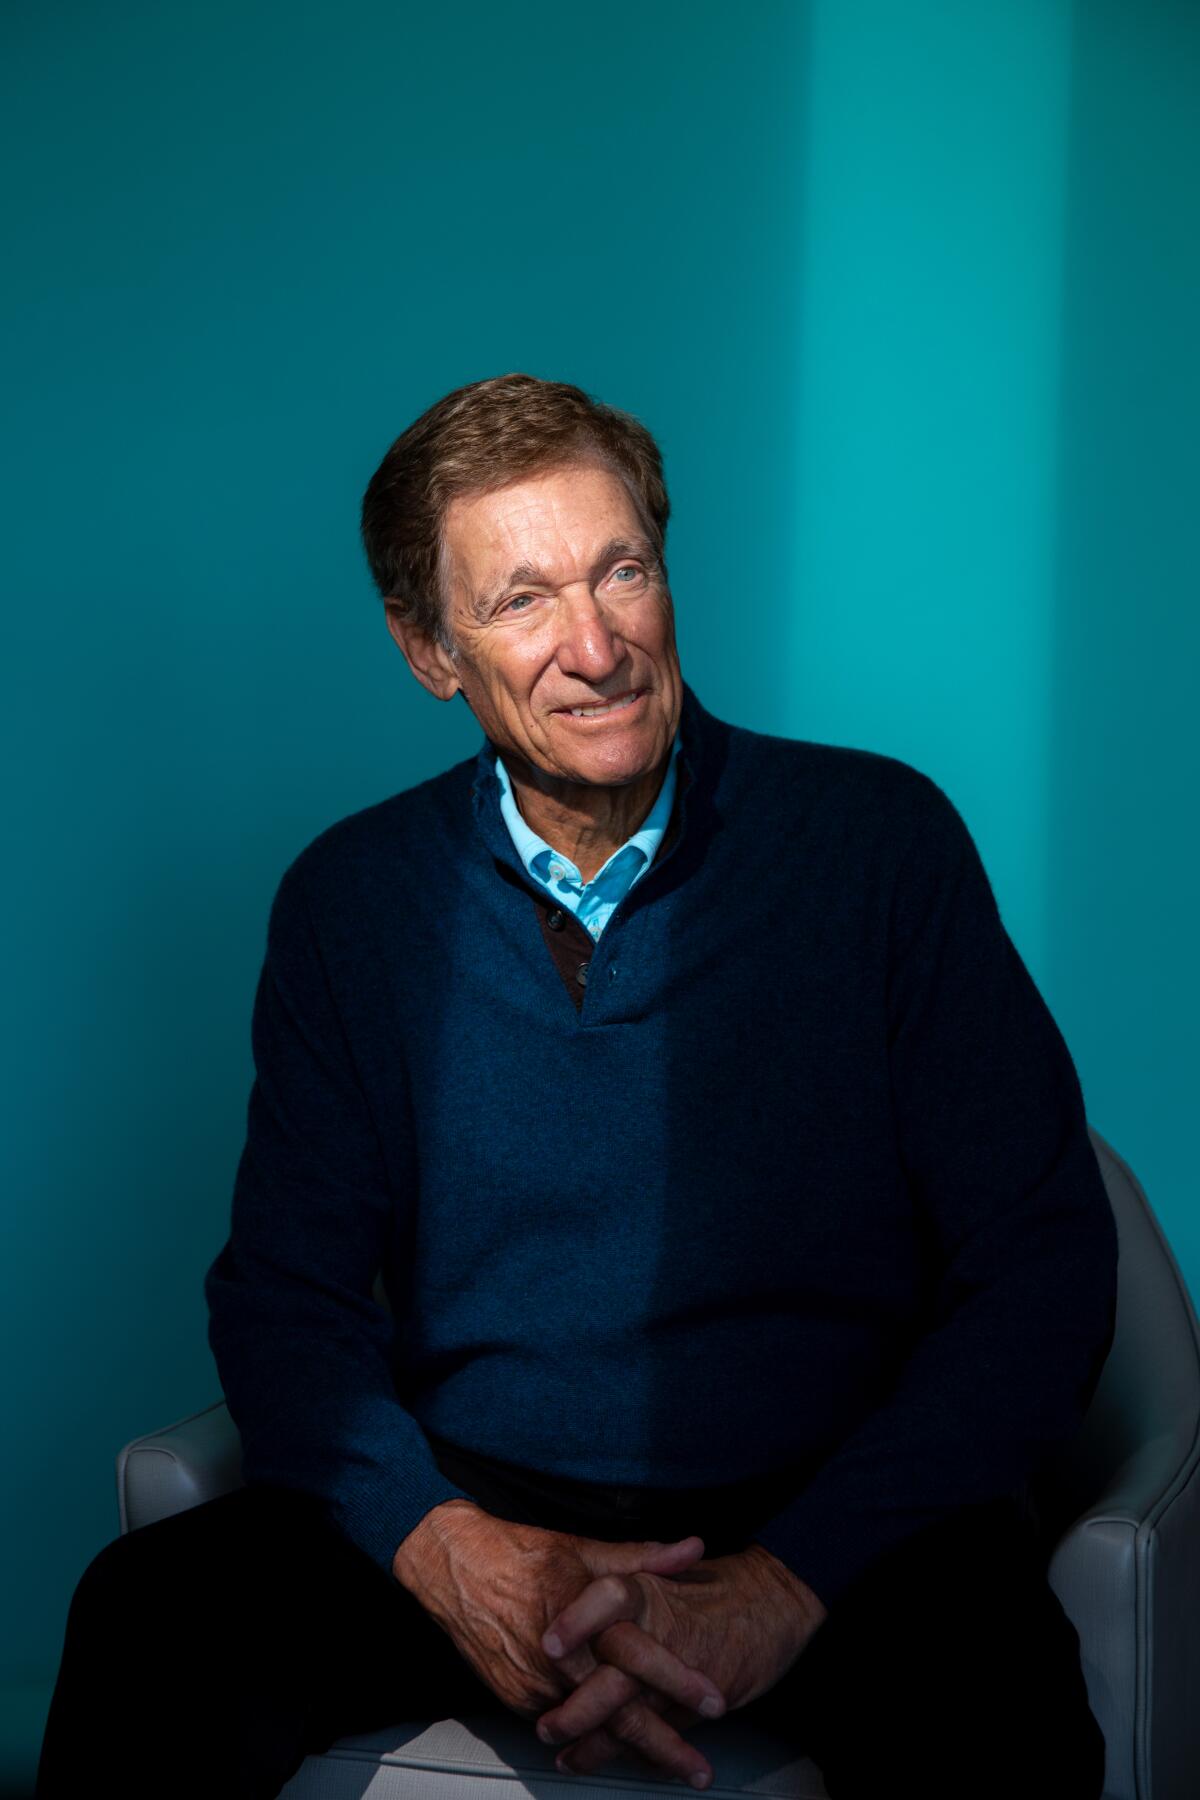 A portrait of Maury Povich in a dark sweater and jacket.